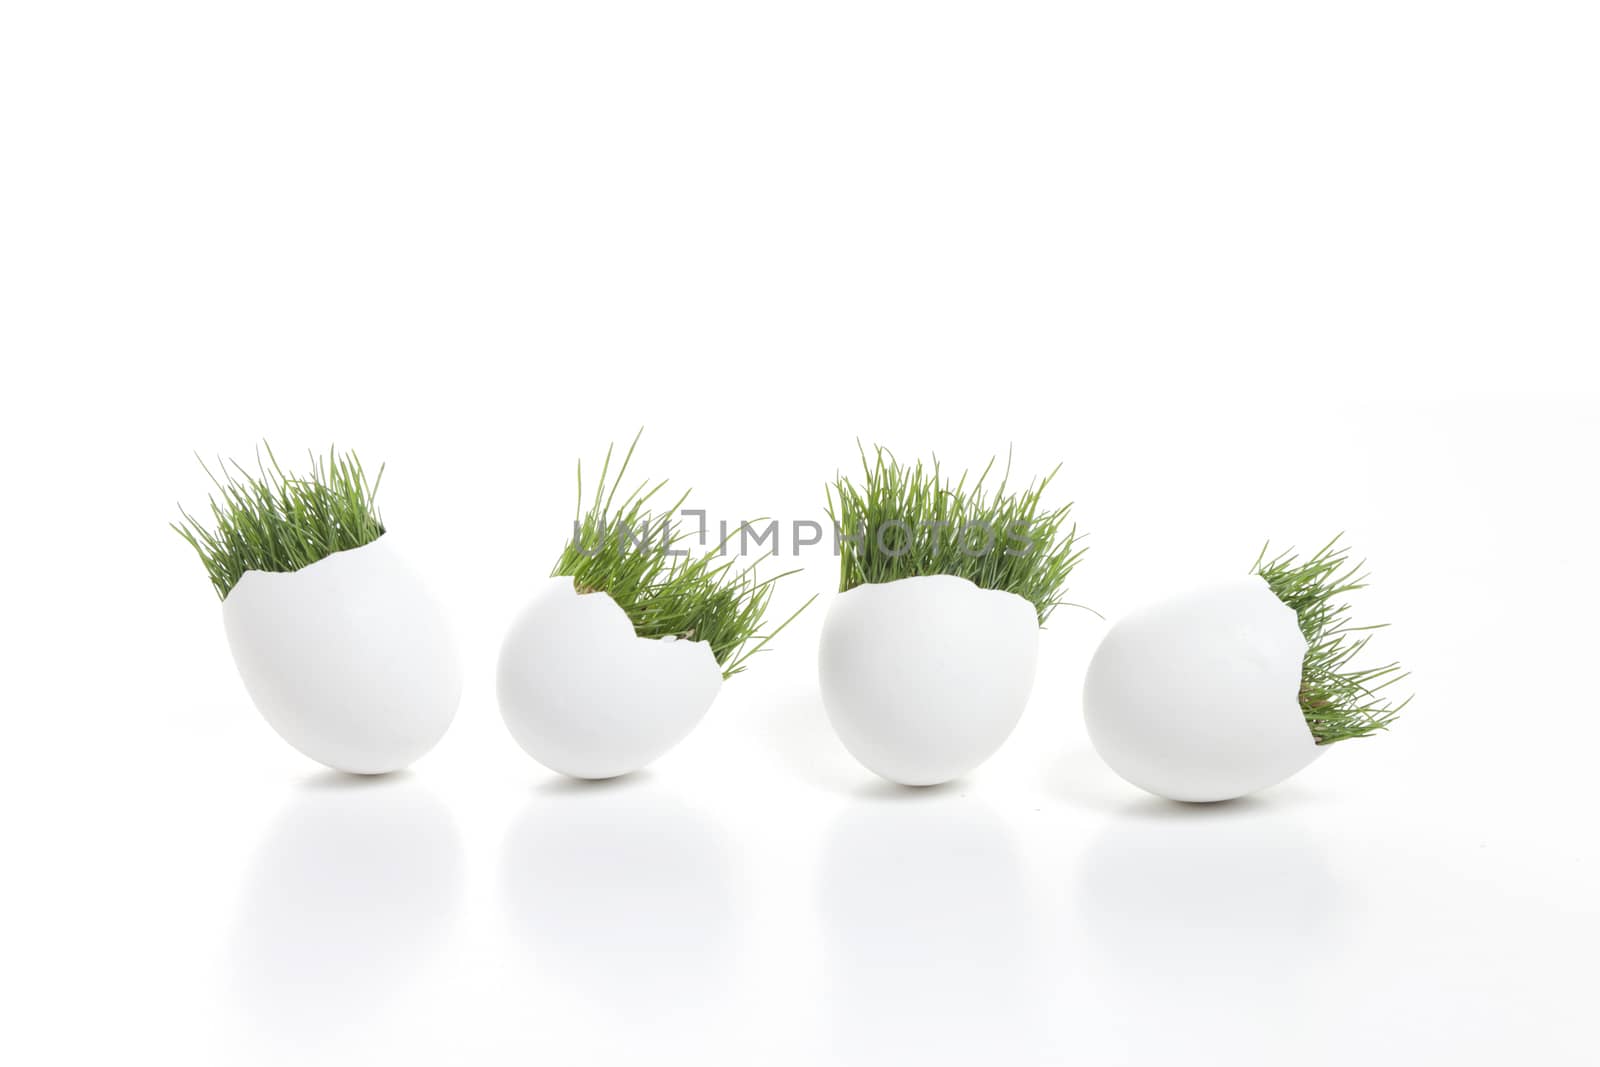 Four white egss with grass on a white background.